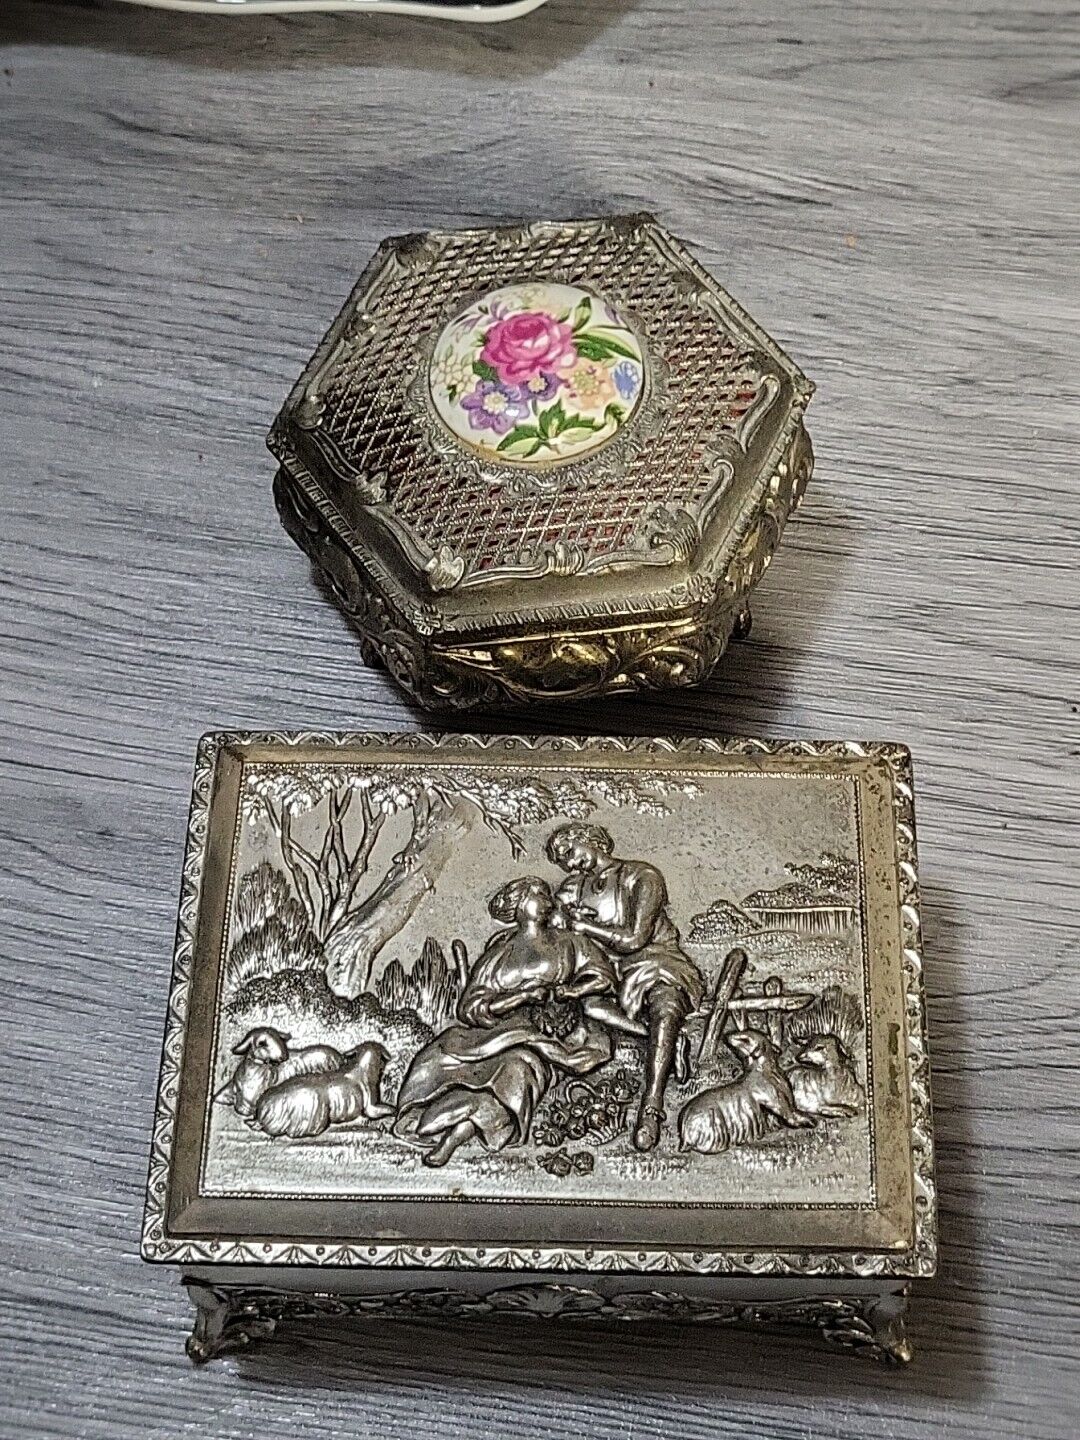 Vintage  Silver Plated Trinket  Jewelry Box Lot Ornate Style Set Of 2 